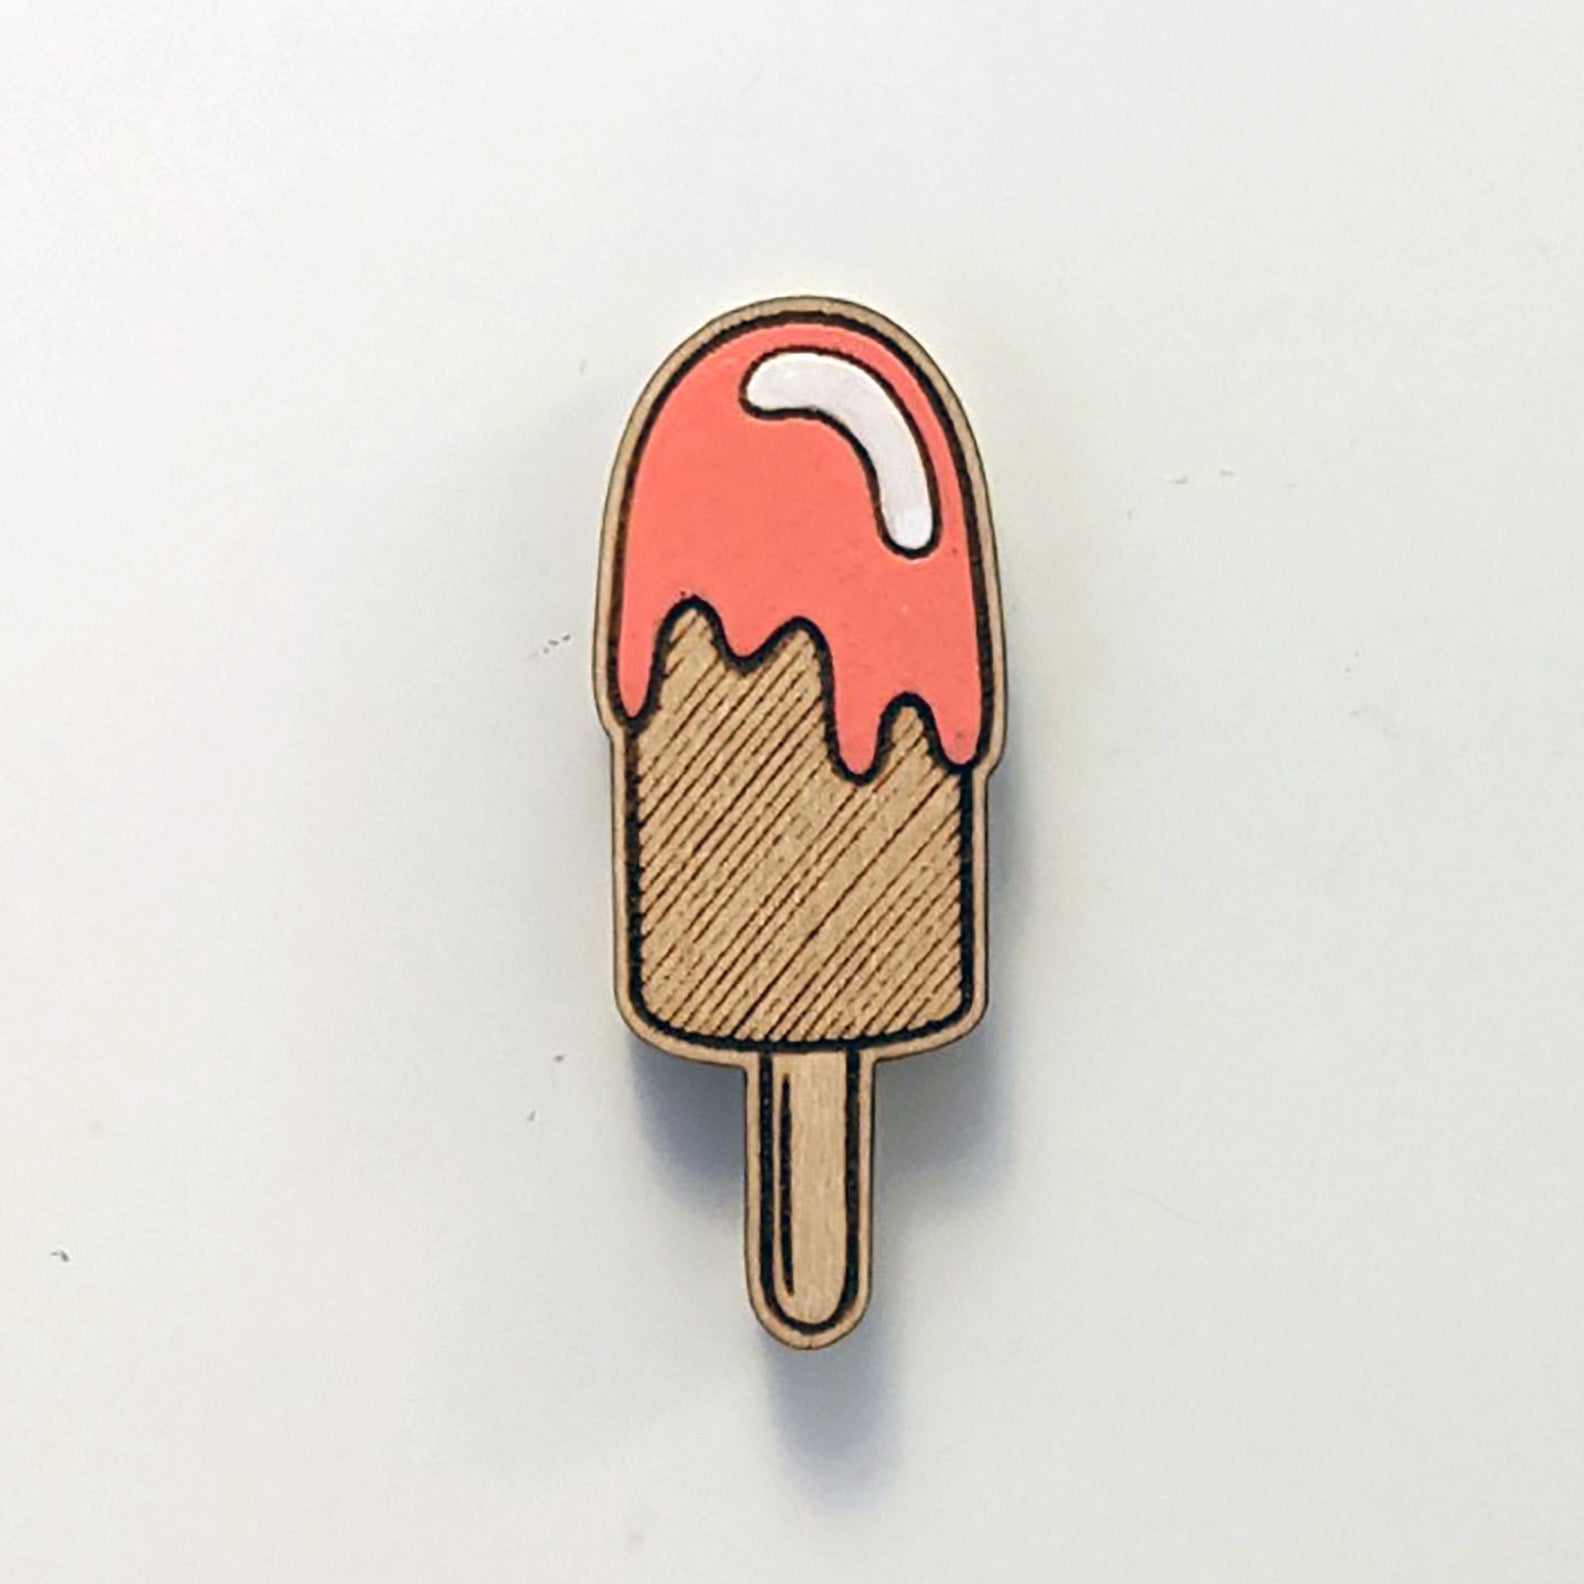 Popsicle Magnets